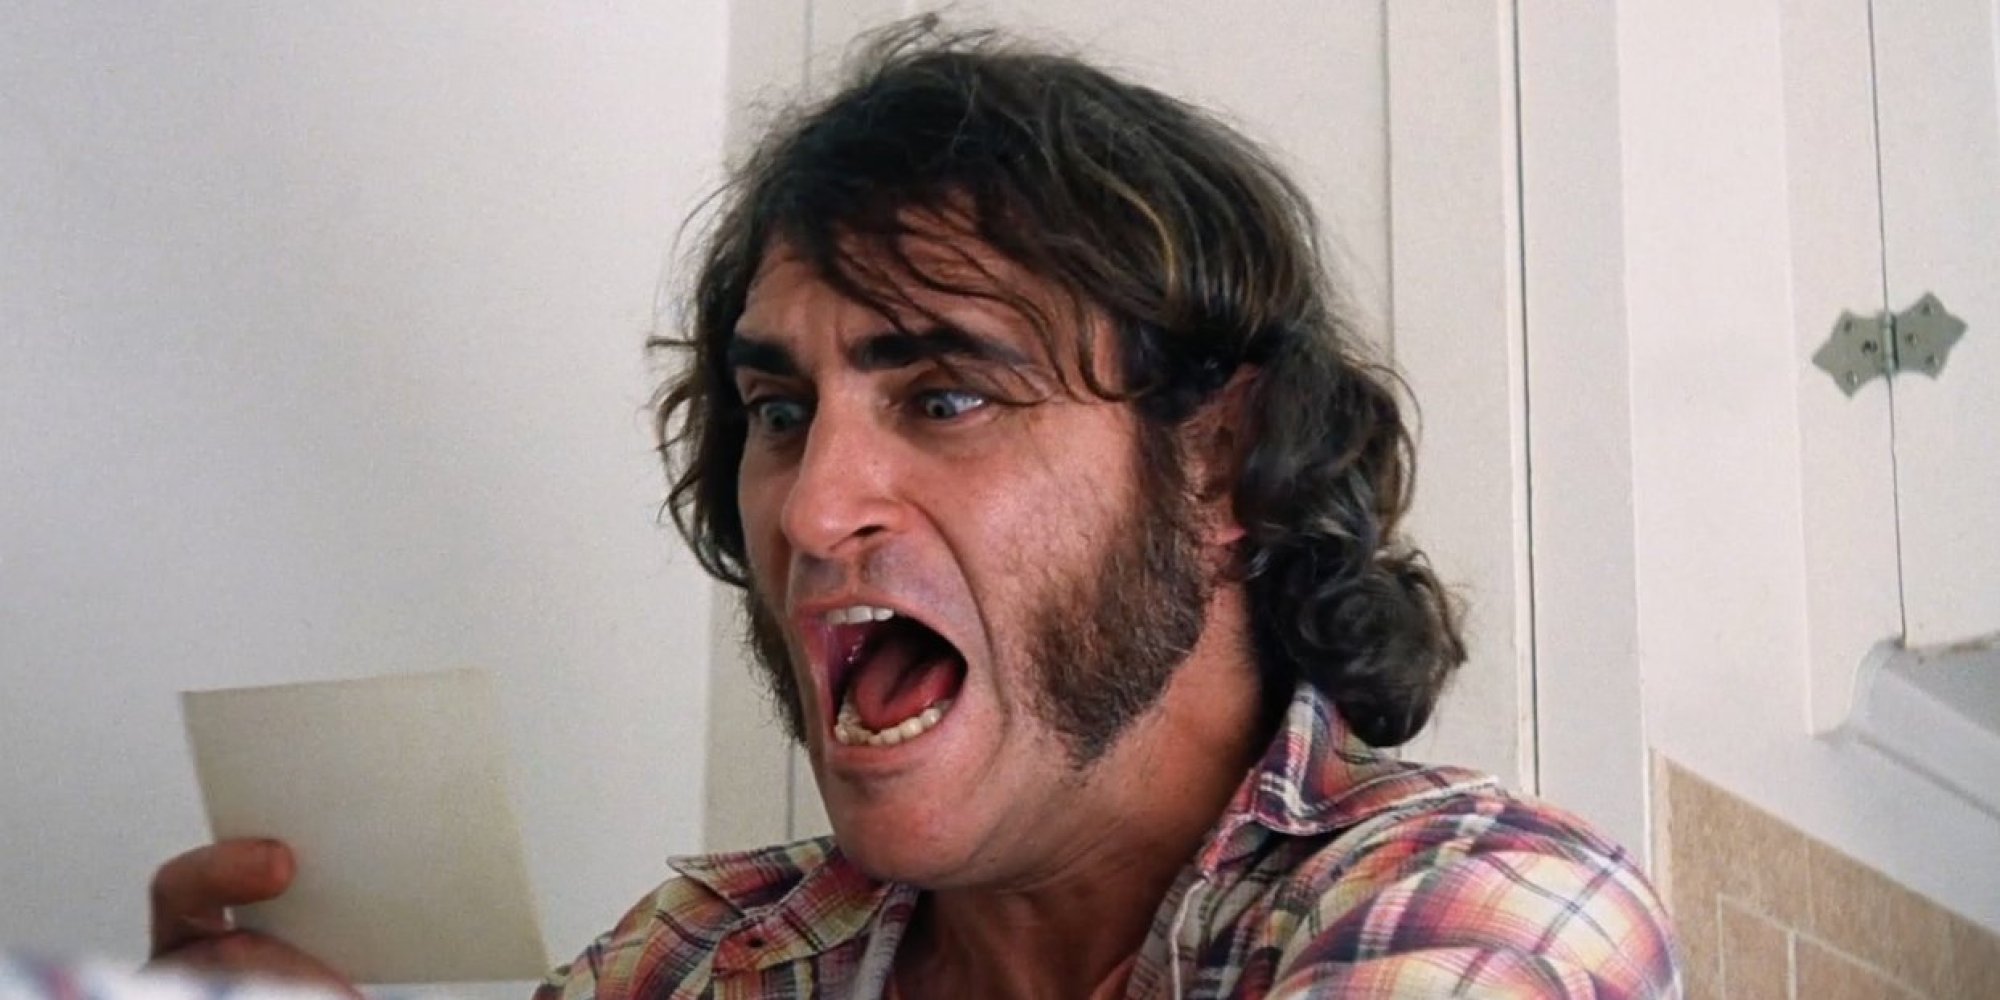 INHERENT VICE is Baffling and (maybe) Supposed to be Funny?